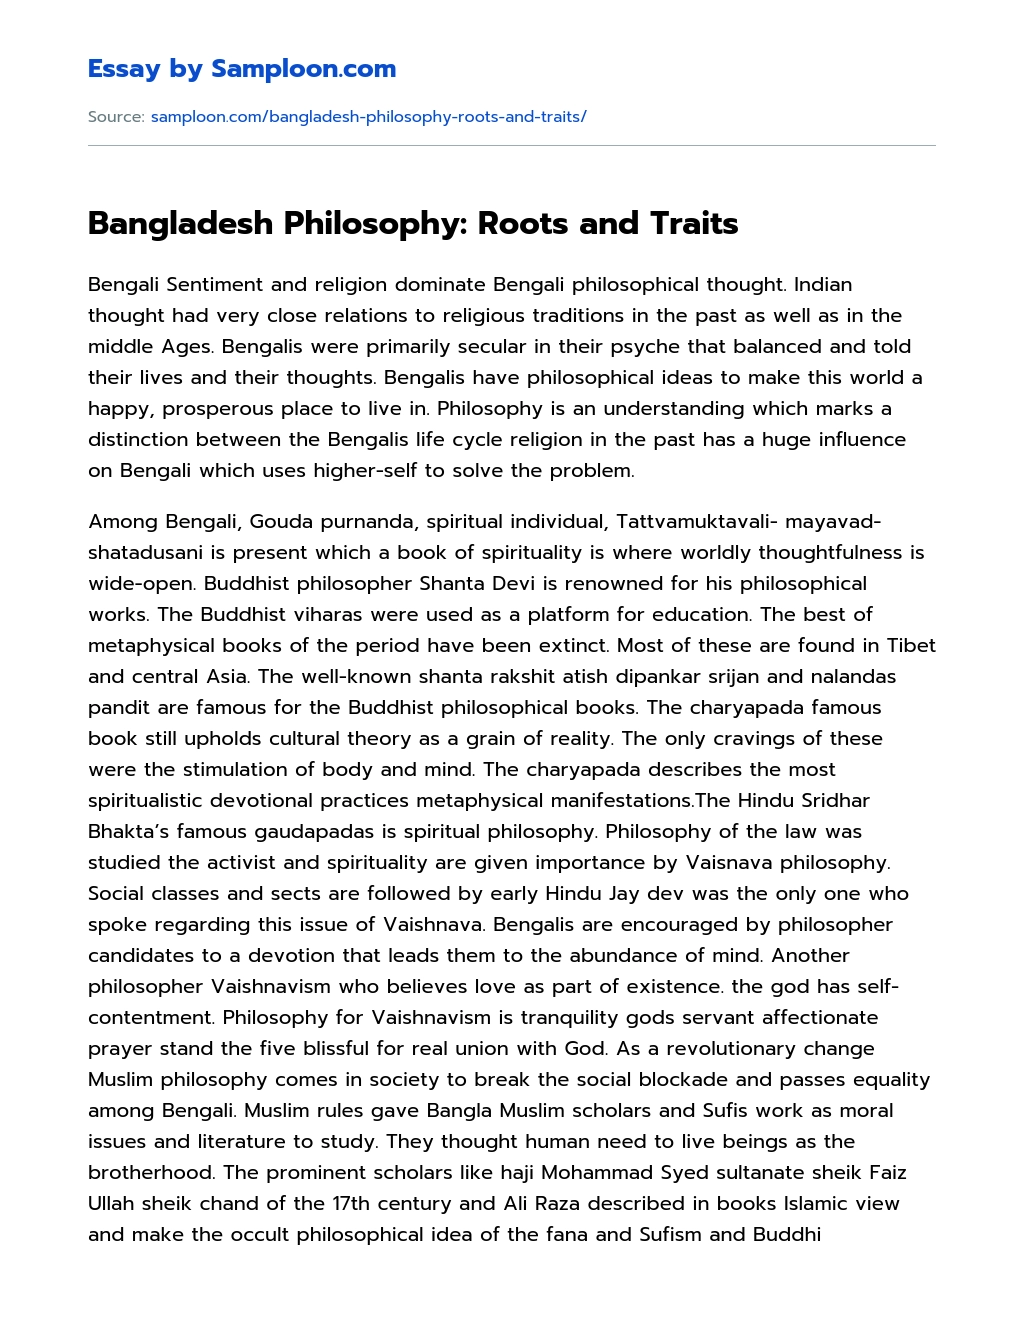 Bangladesh Philosophy: Roots and Traits essay